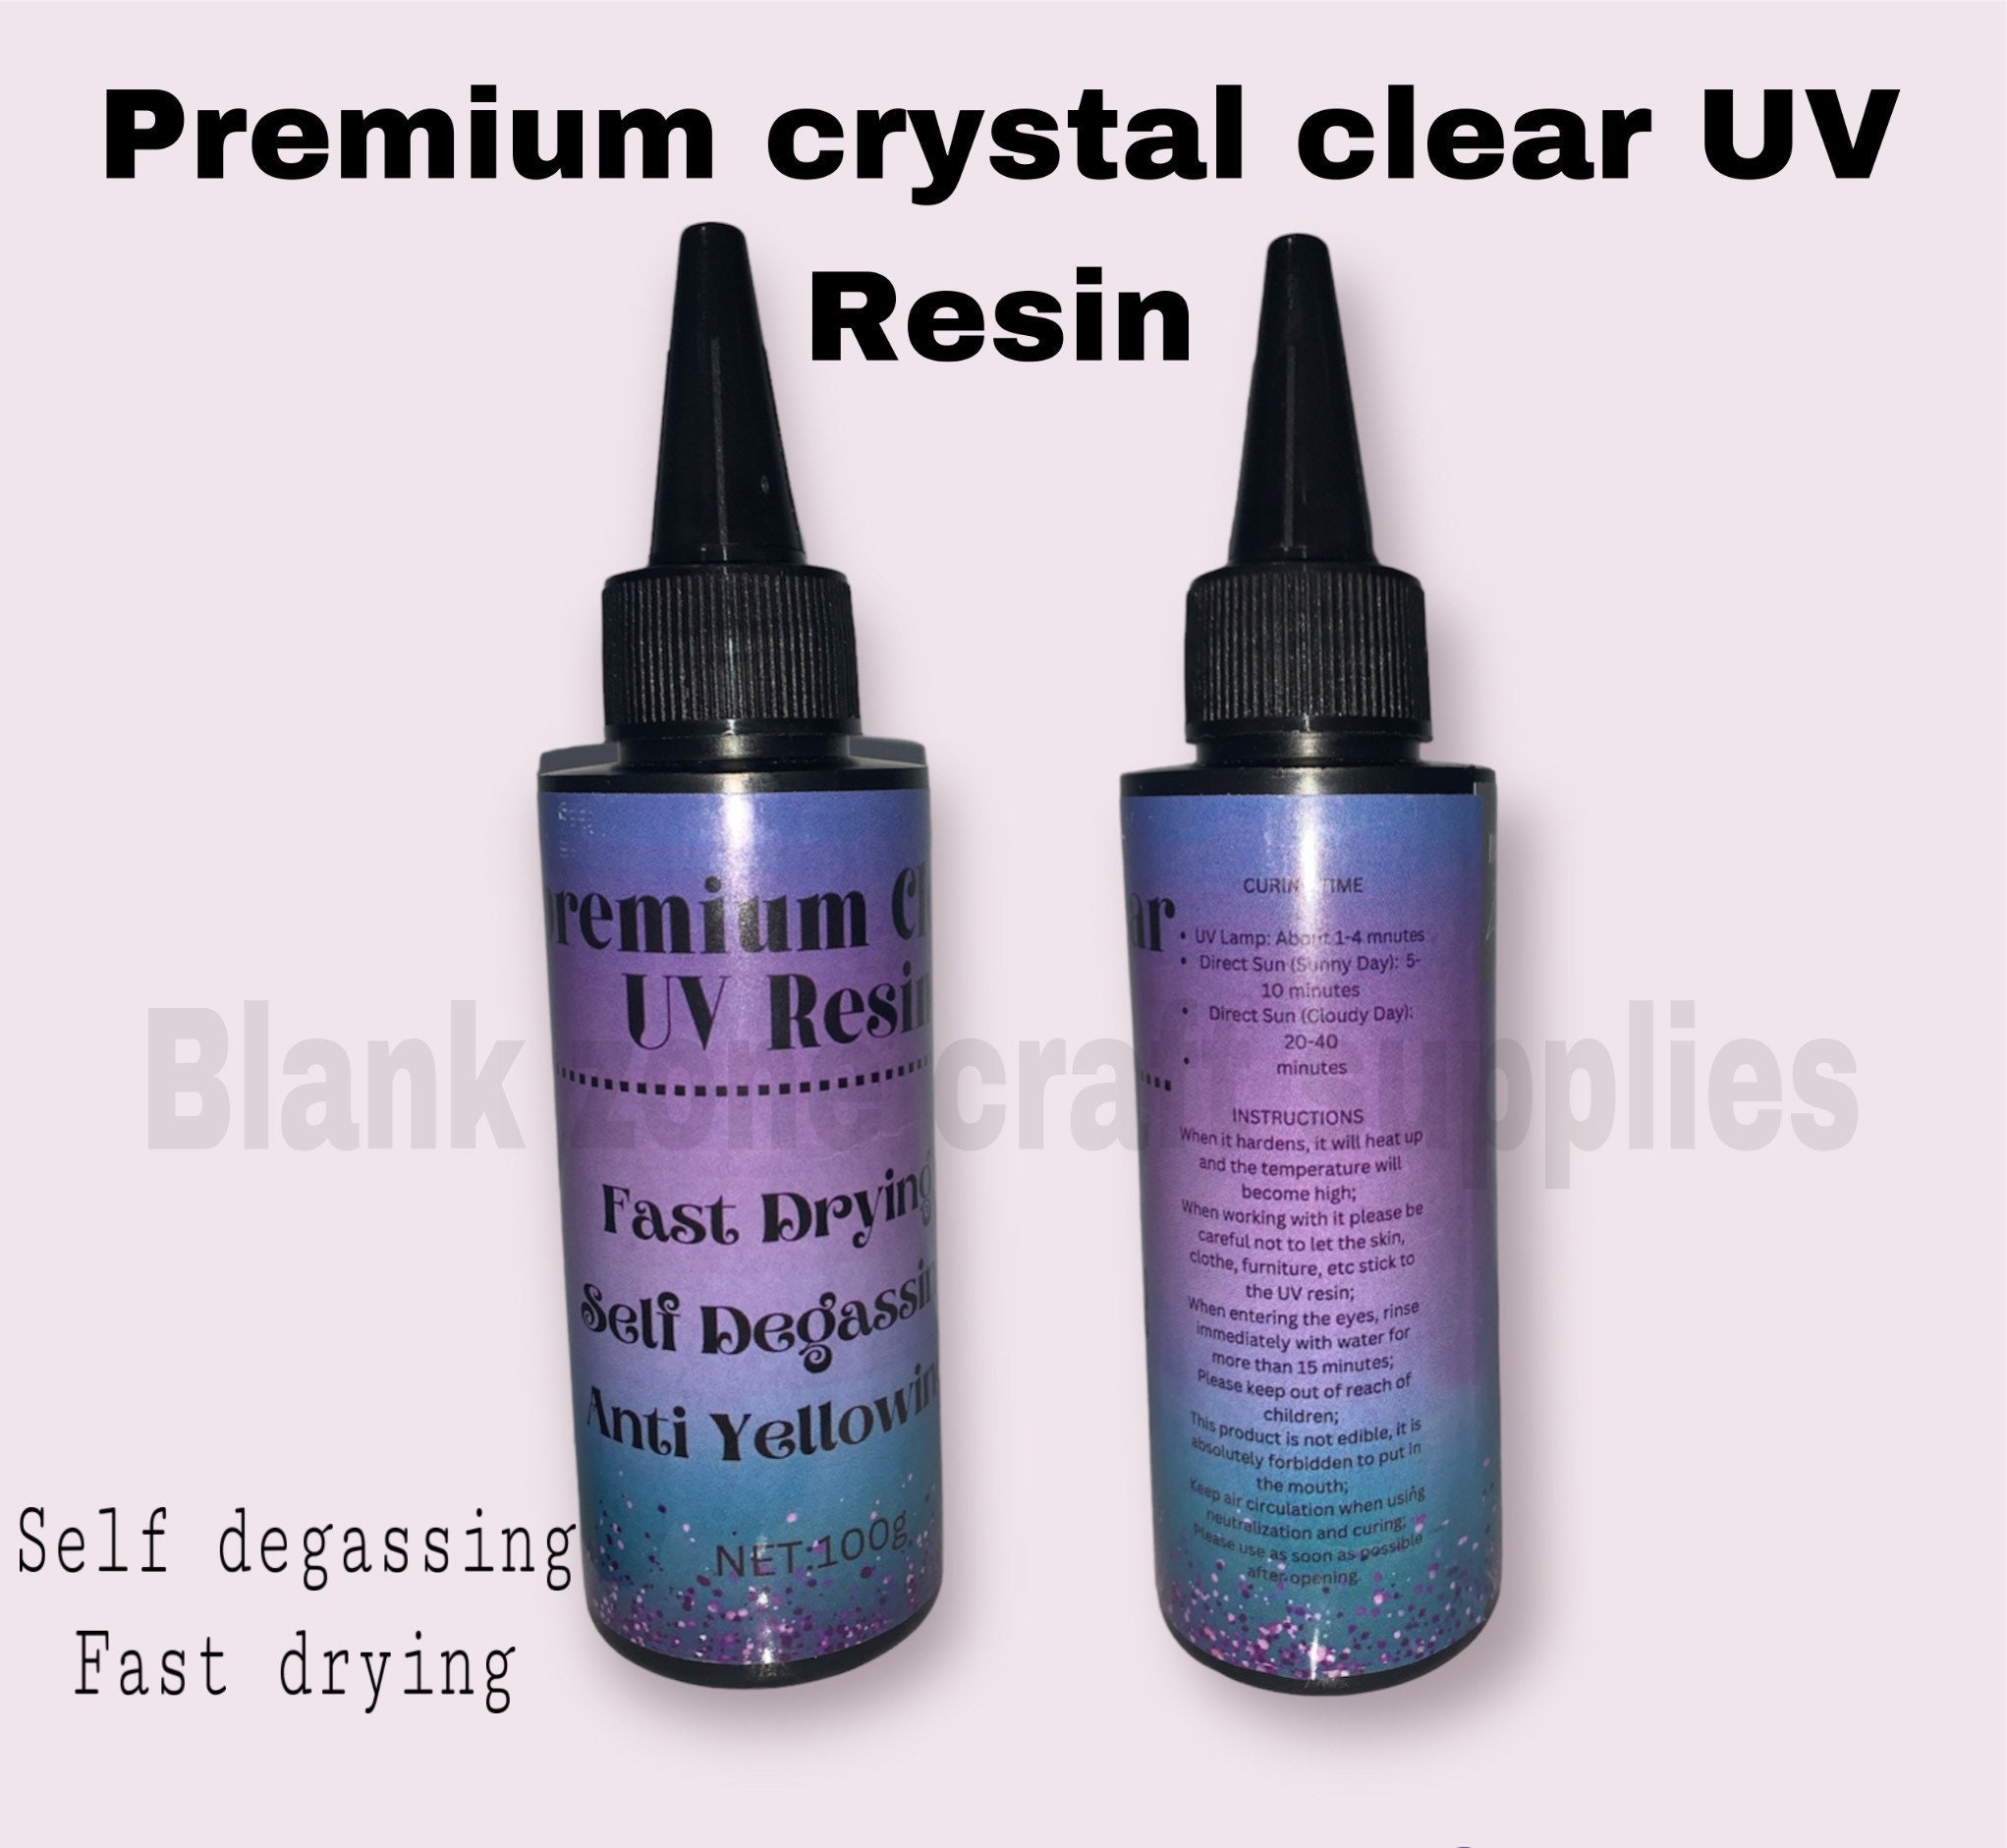 UV-LED Resin Light Mini, 6w, Portable, 2 or 3 Minute Timer, Use W/uv Resin  and Uv-led Resin, Lamp & Cord Provided, Plug Into Your Adapter 